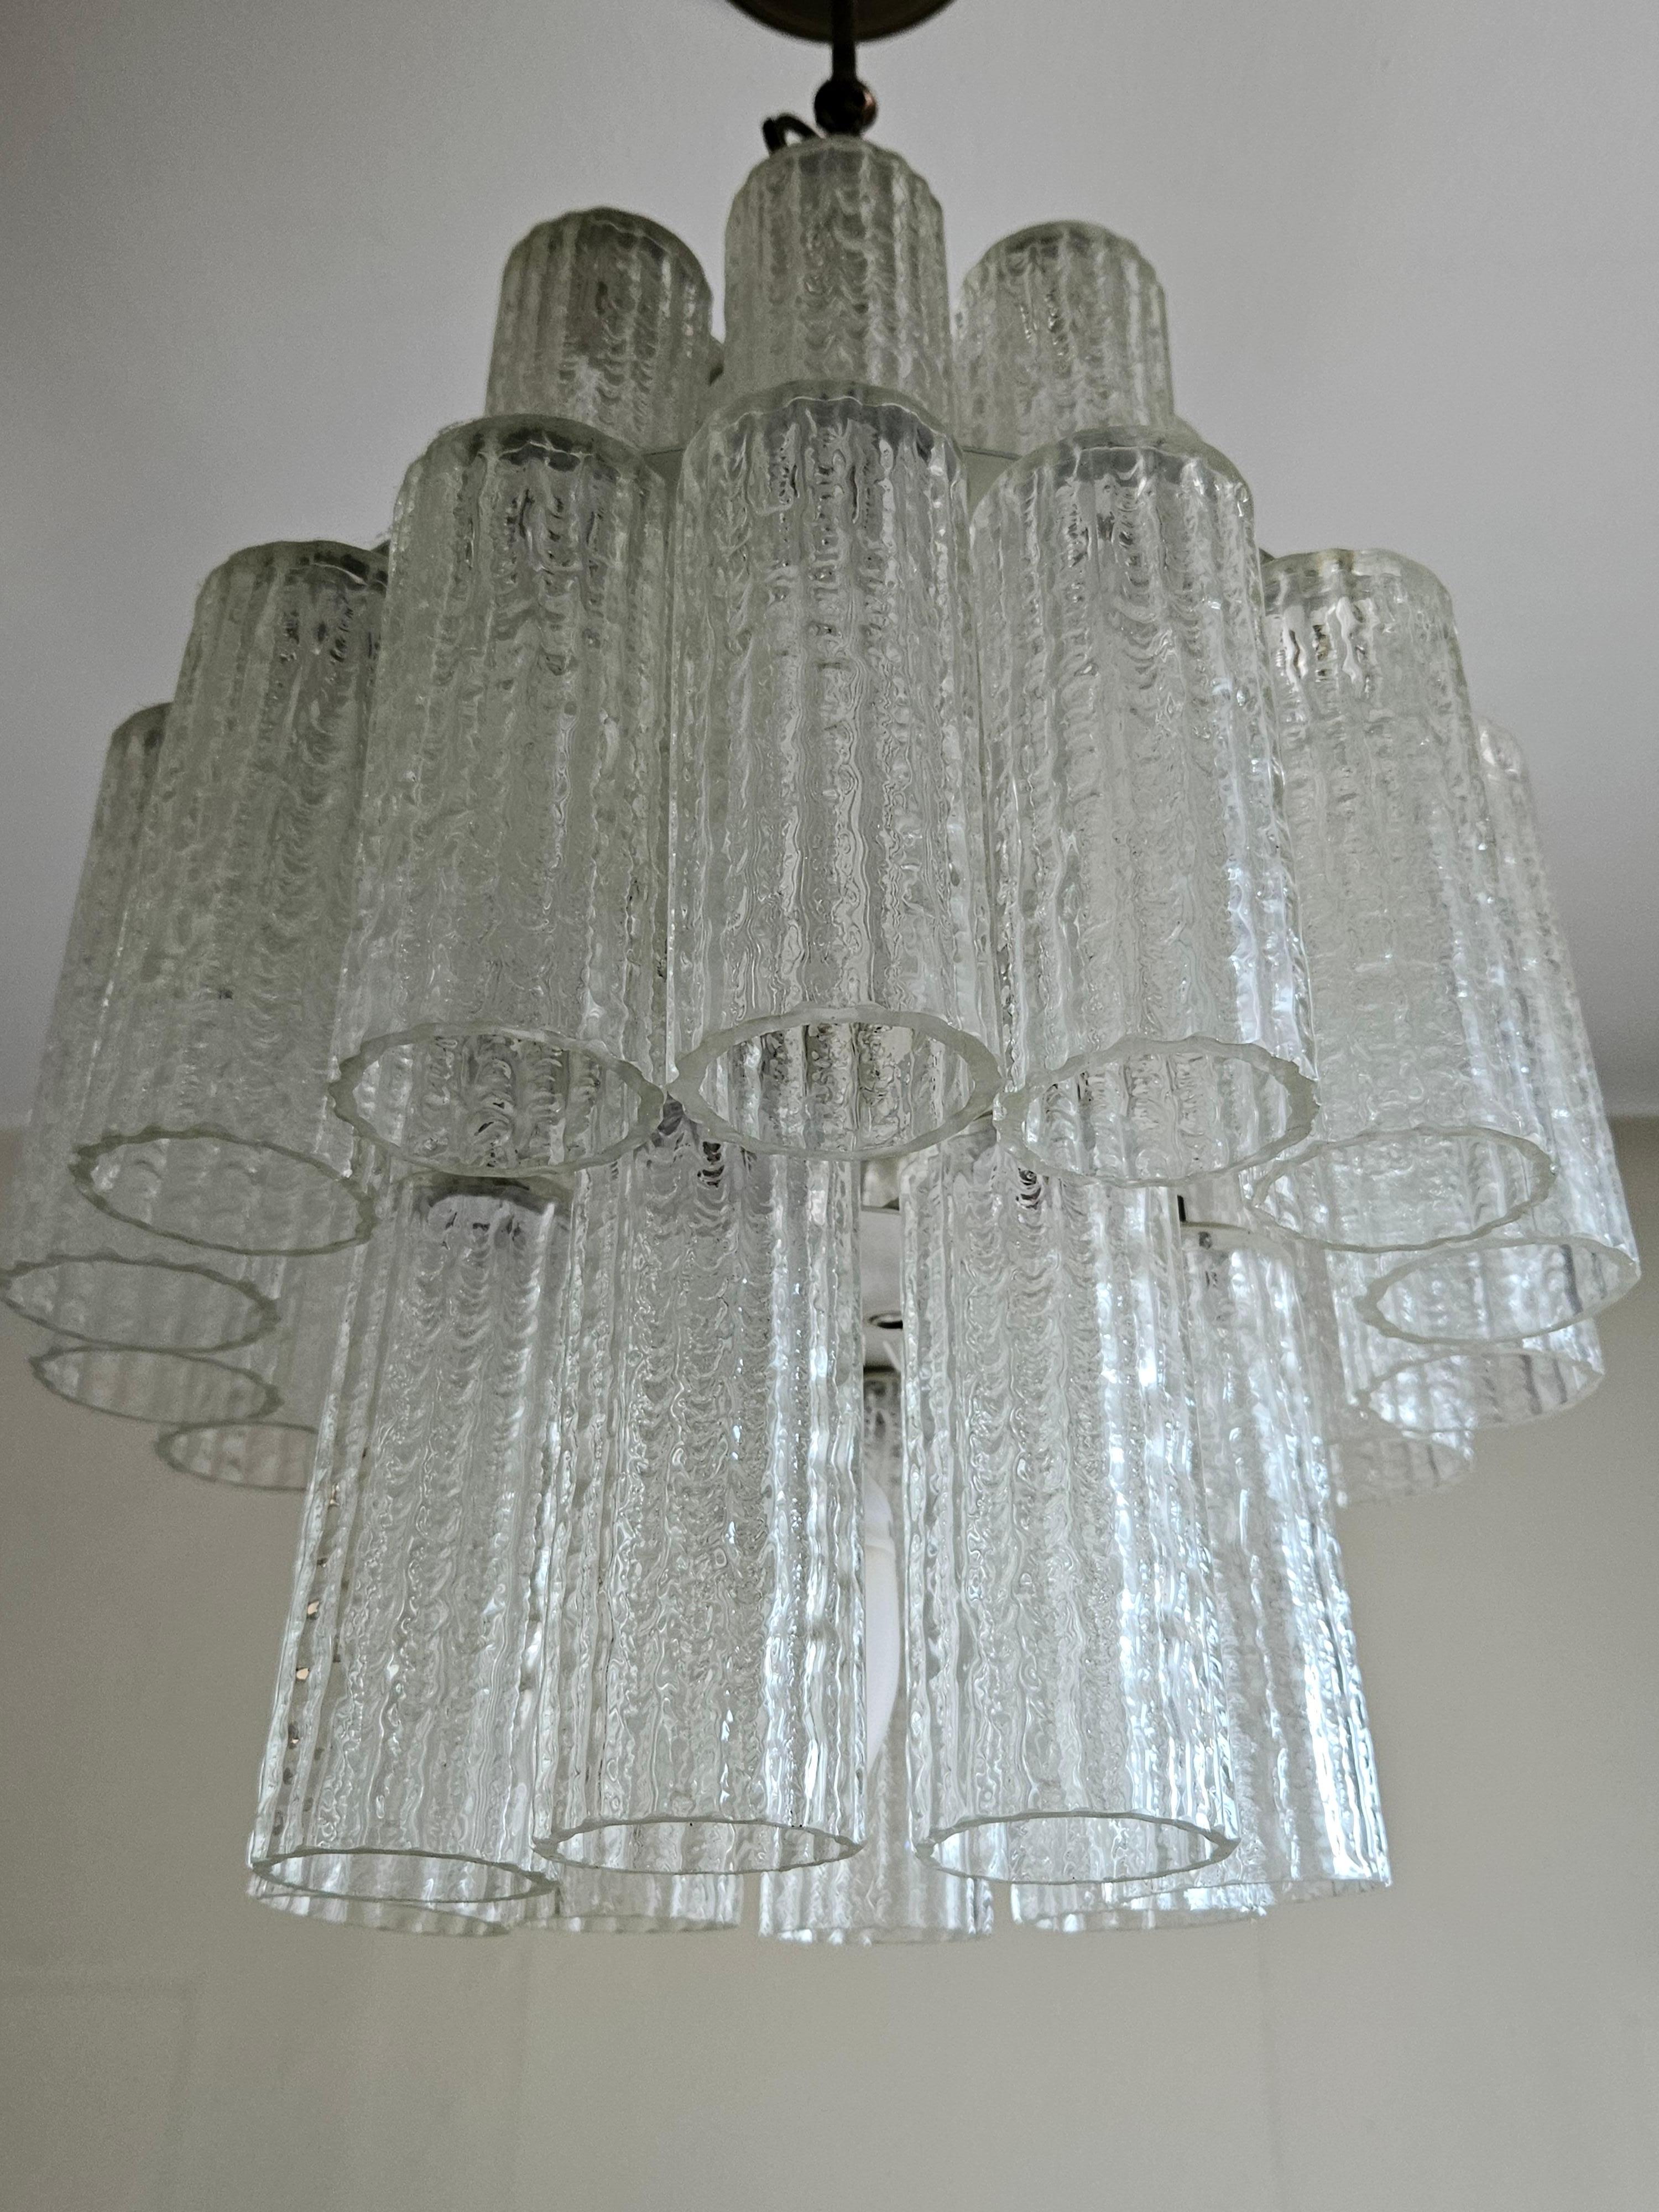 Venetian chandelier from the early 1970s made of Murano glass with 32 tubes, very scenic and designer.

Designed on the inspiration of high-class environments it finds a place in spacious living rooms, lounges or entrances.

Bulbs not included..
